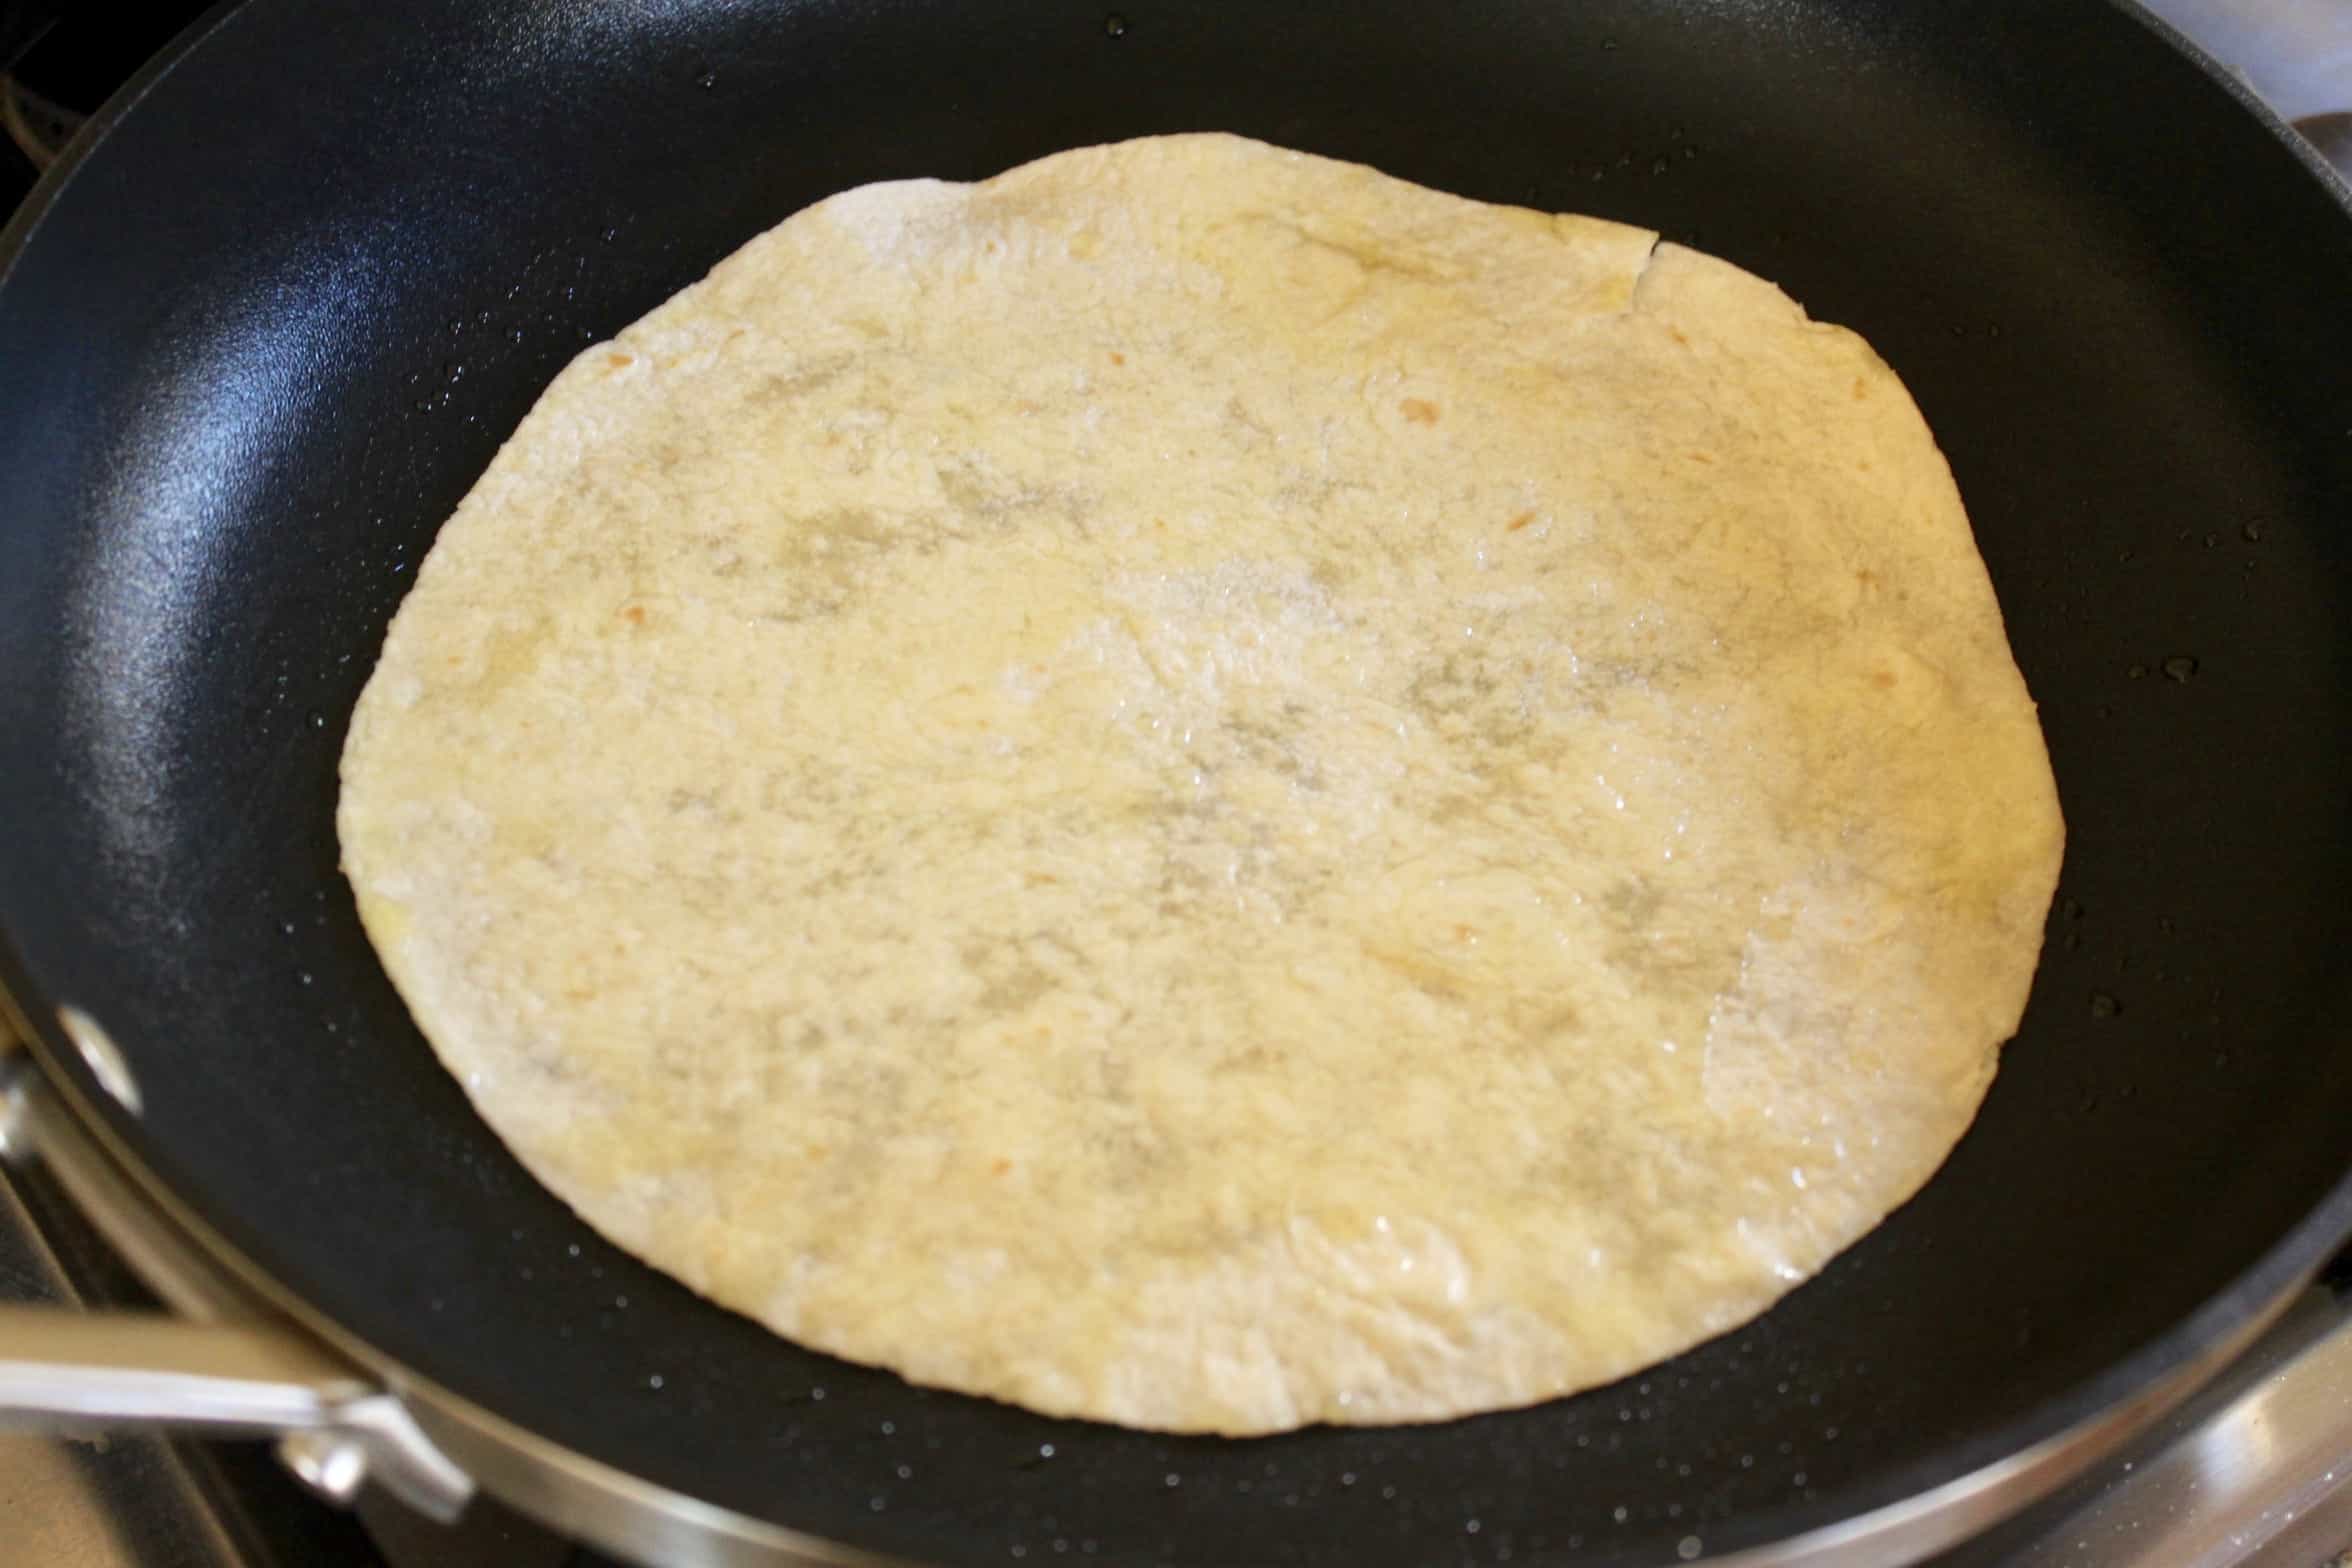 quickly heating the tortilla in oil